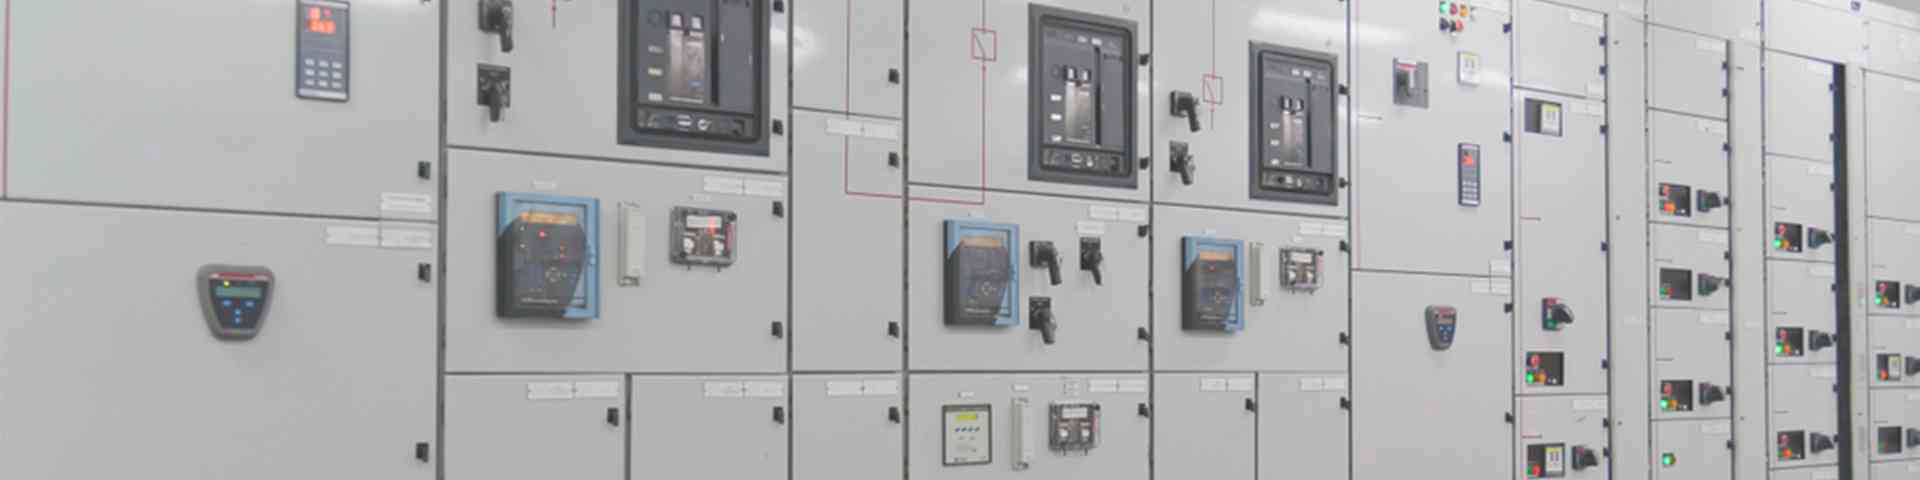 Power Control Center Panel Boards